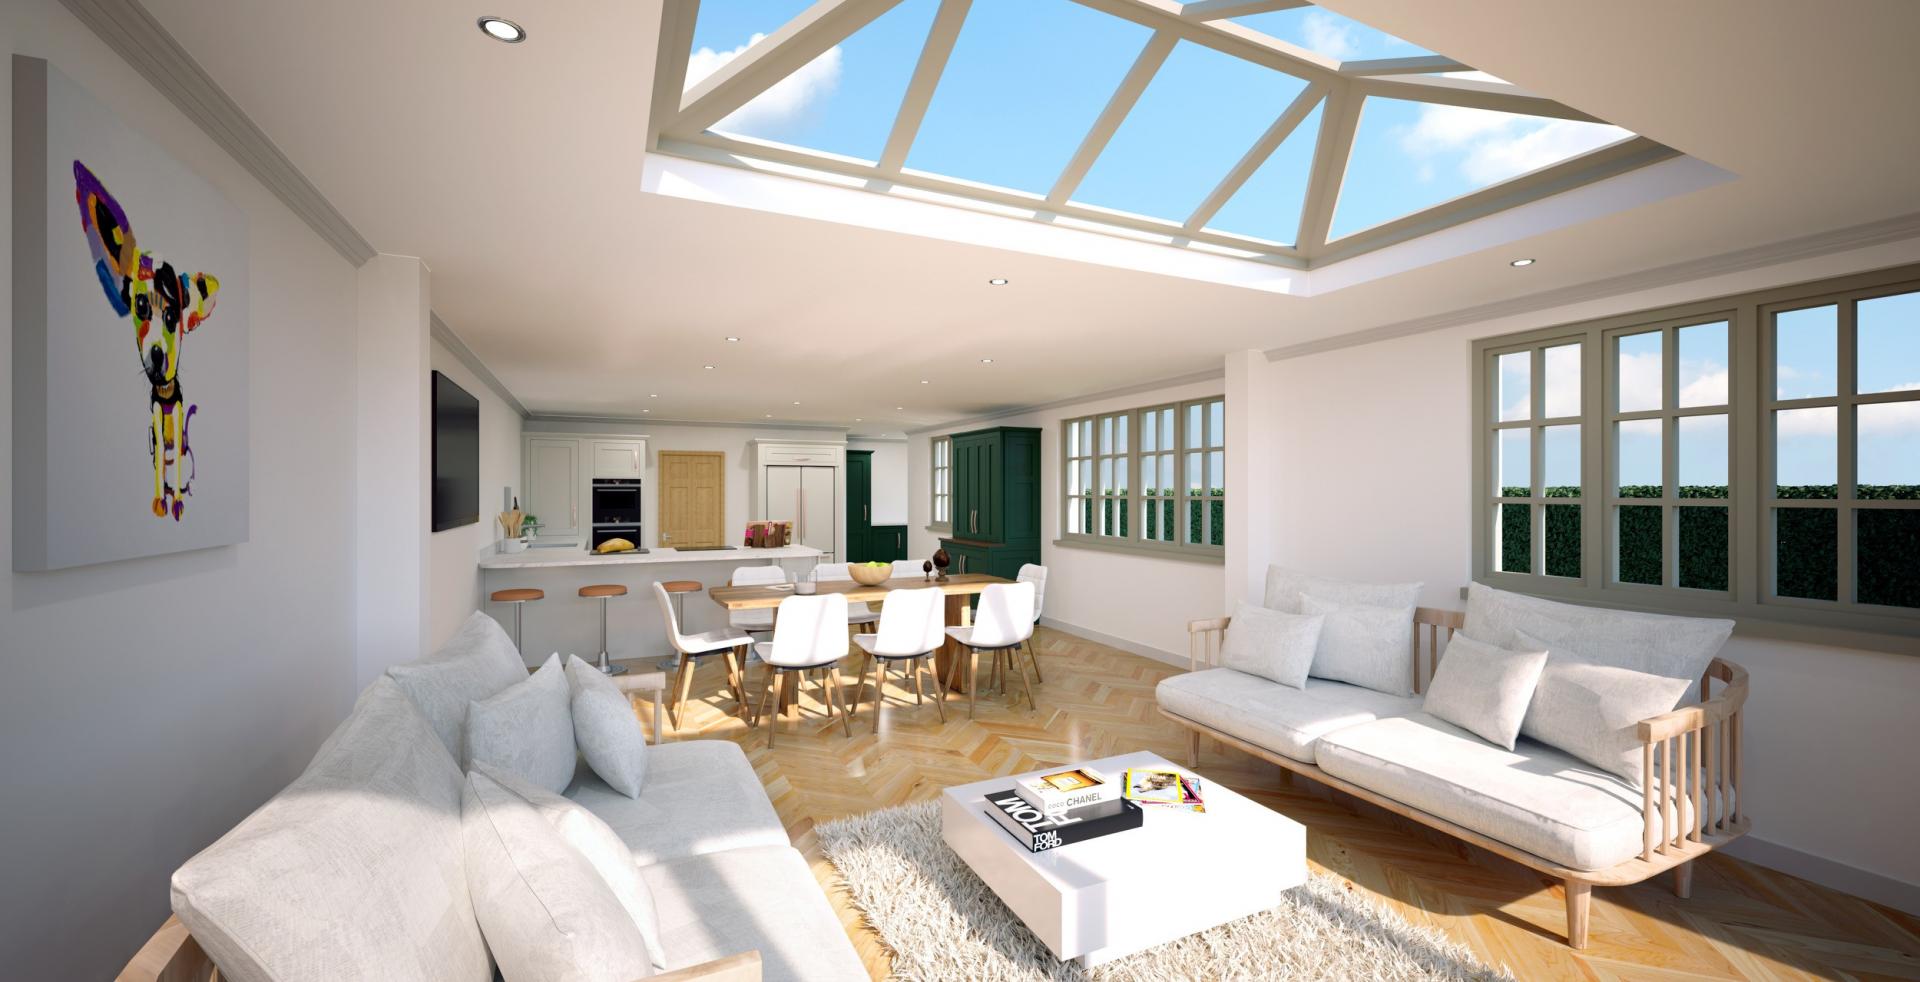 Henley-on-Thames, Oxfordshire, 4 bedrooms - New Homes Blog